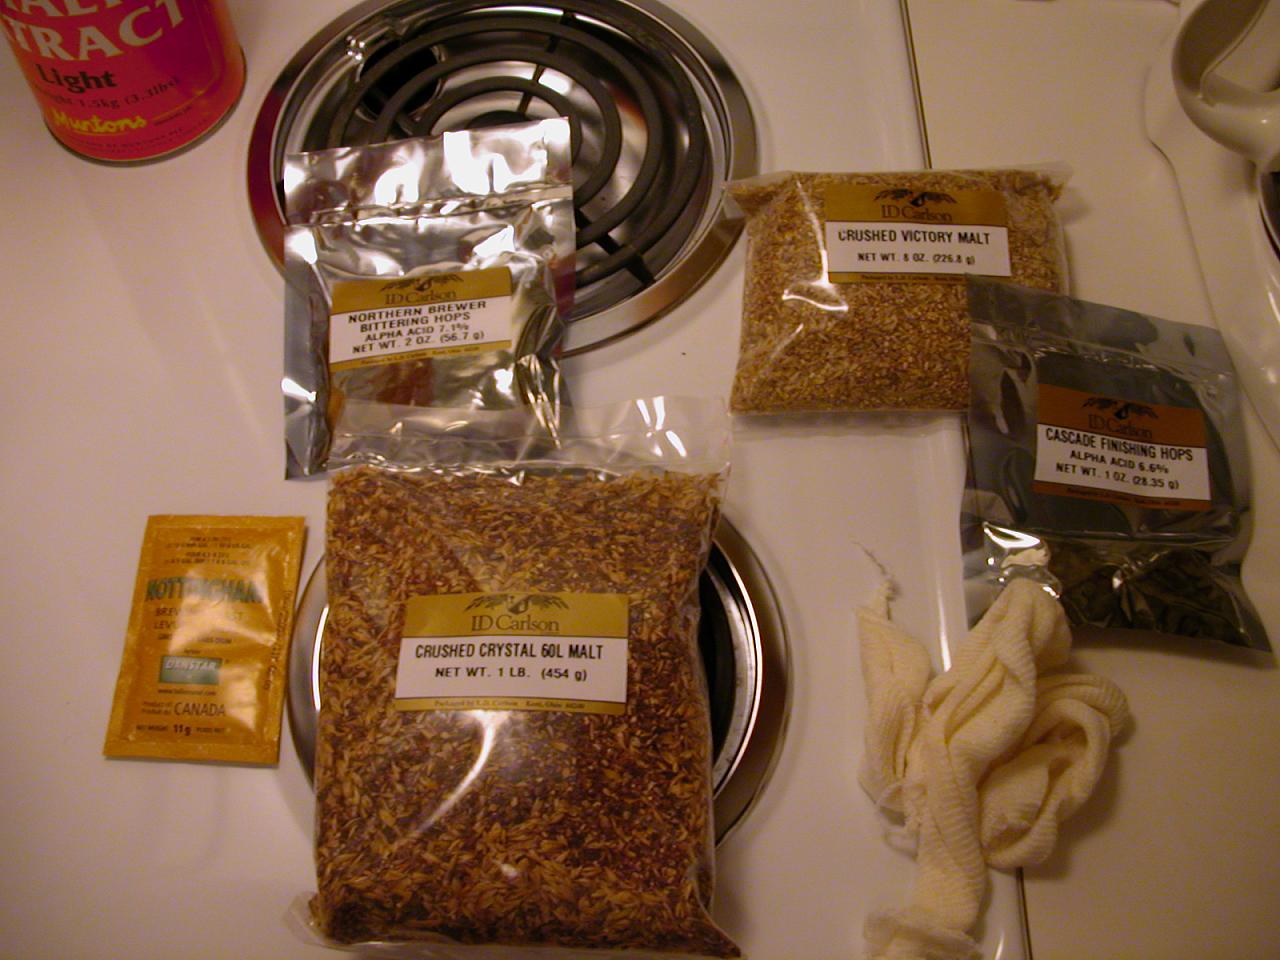 Flavoring grains, malt extract cans, hops, and yeast.